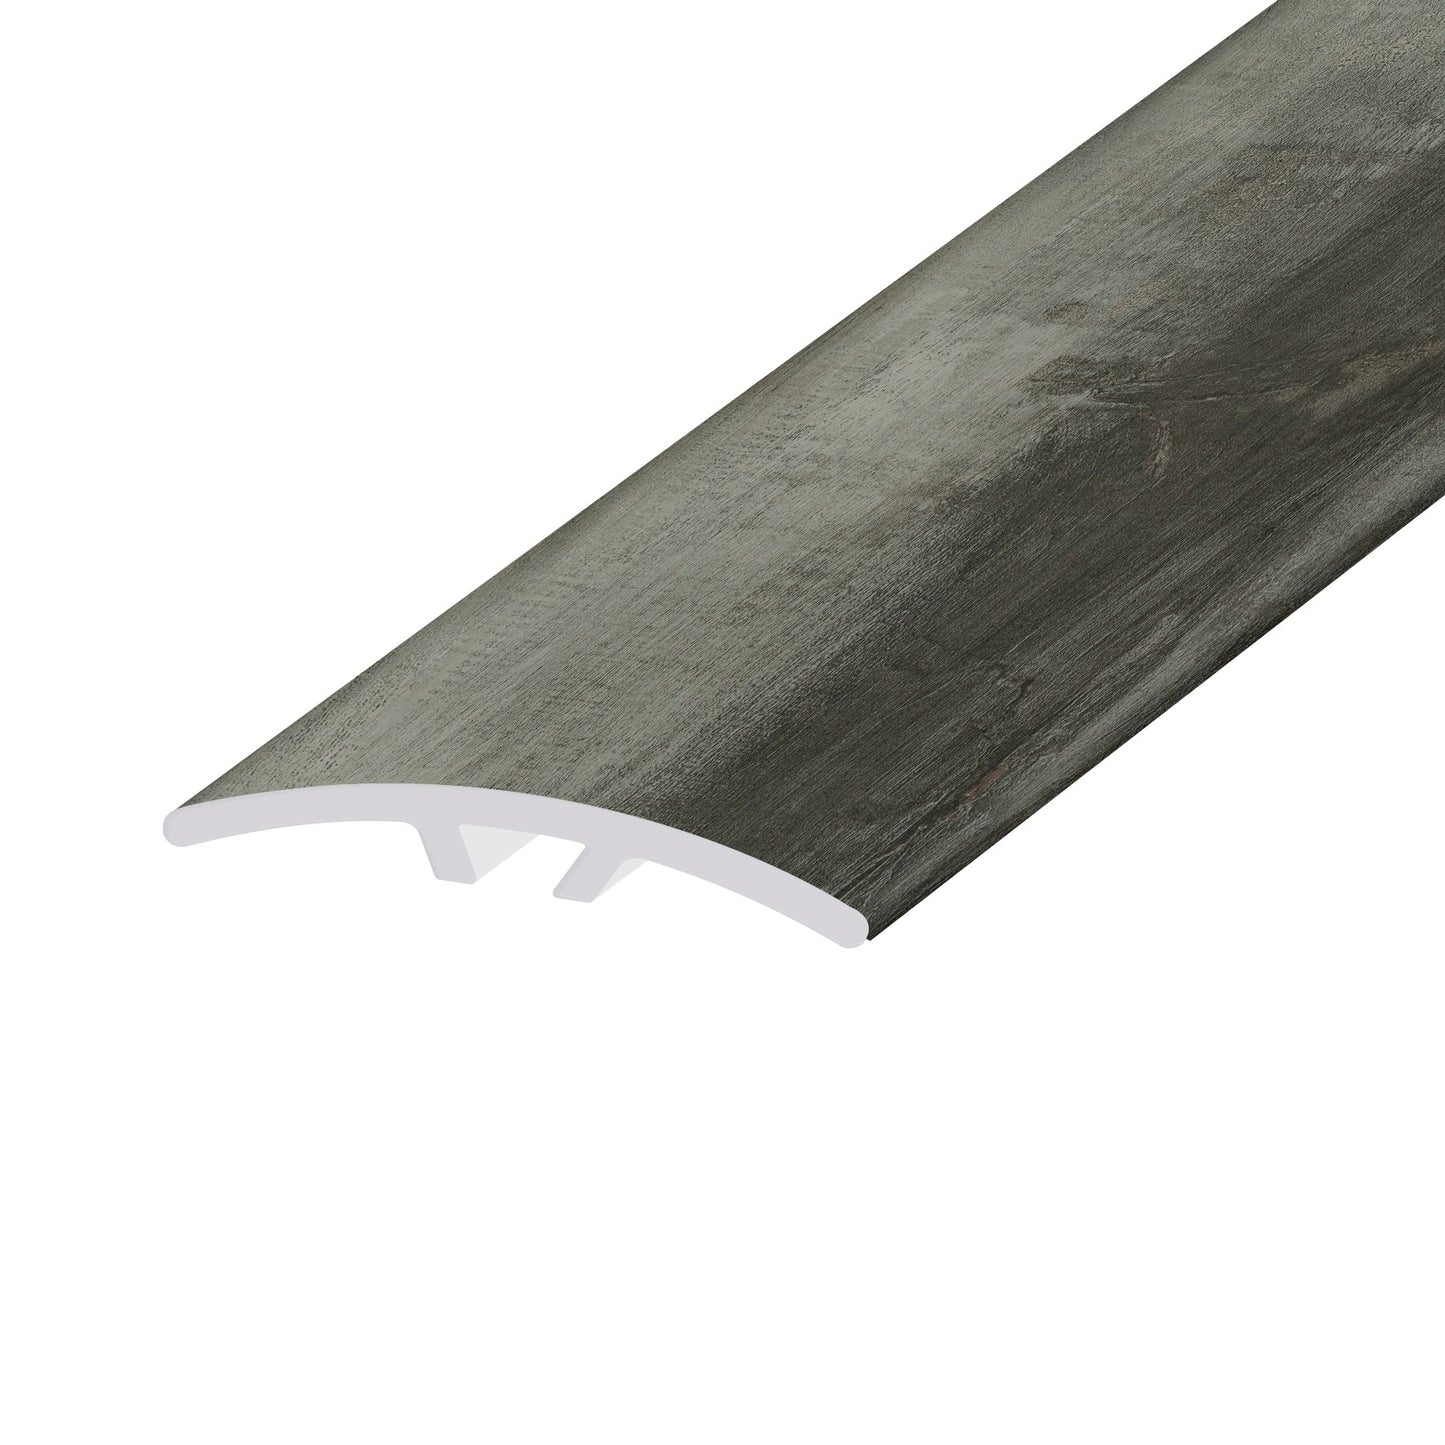 Tundra 0.23 in. Thick x 1.59 in. Width x 94 in. Length Multi-Purpose Reducer Vinyl Molding